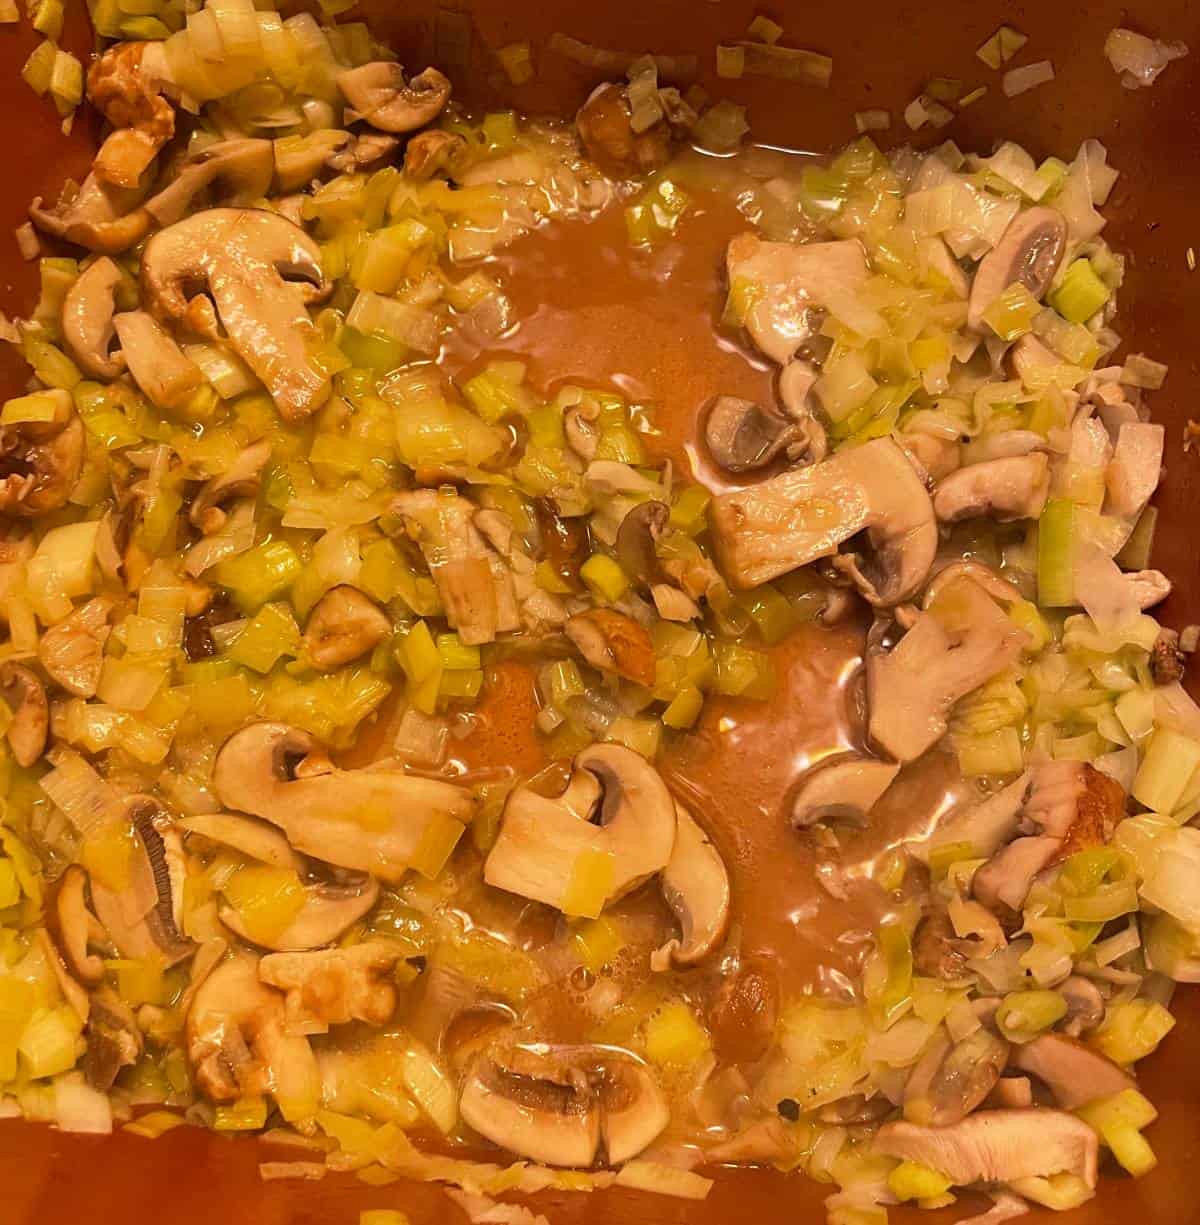 cooking mushrooms with leeks, for braised chicken recipe.